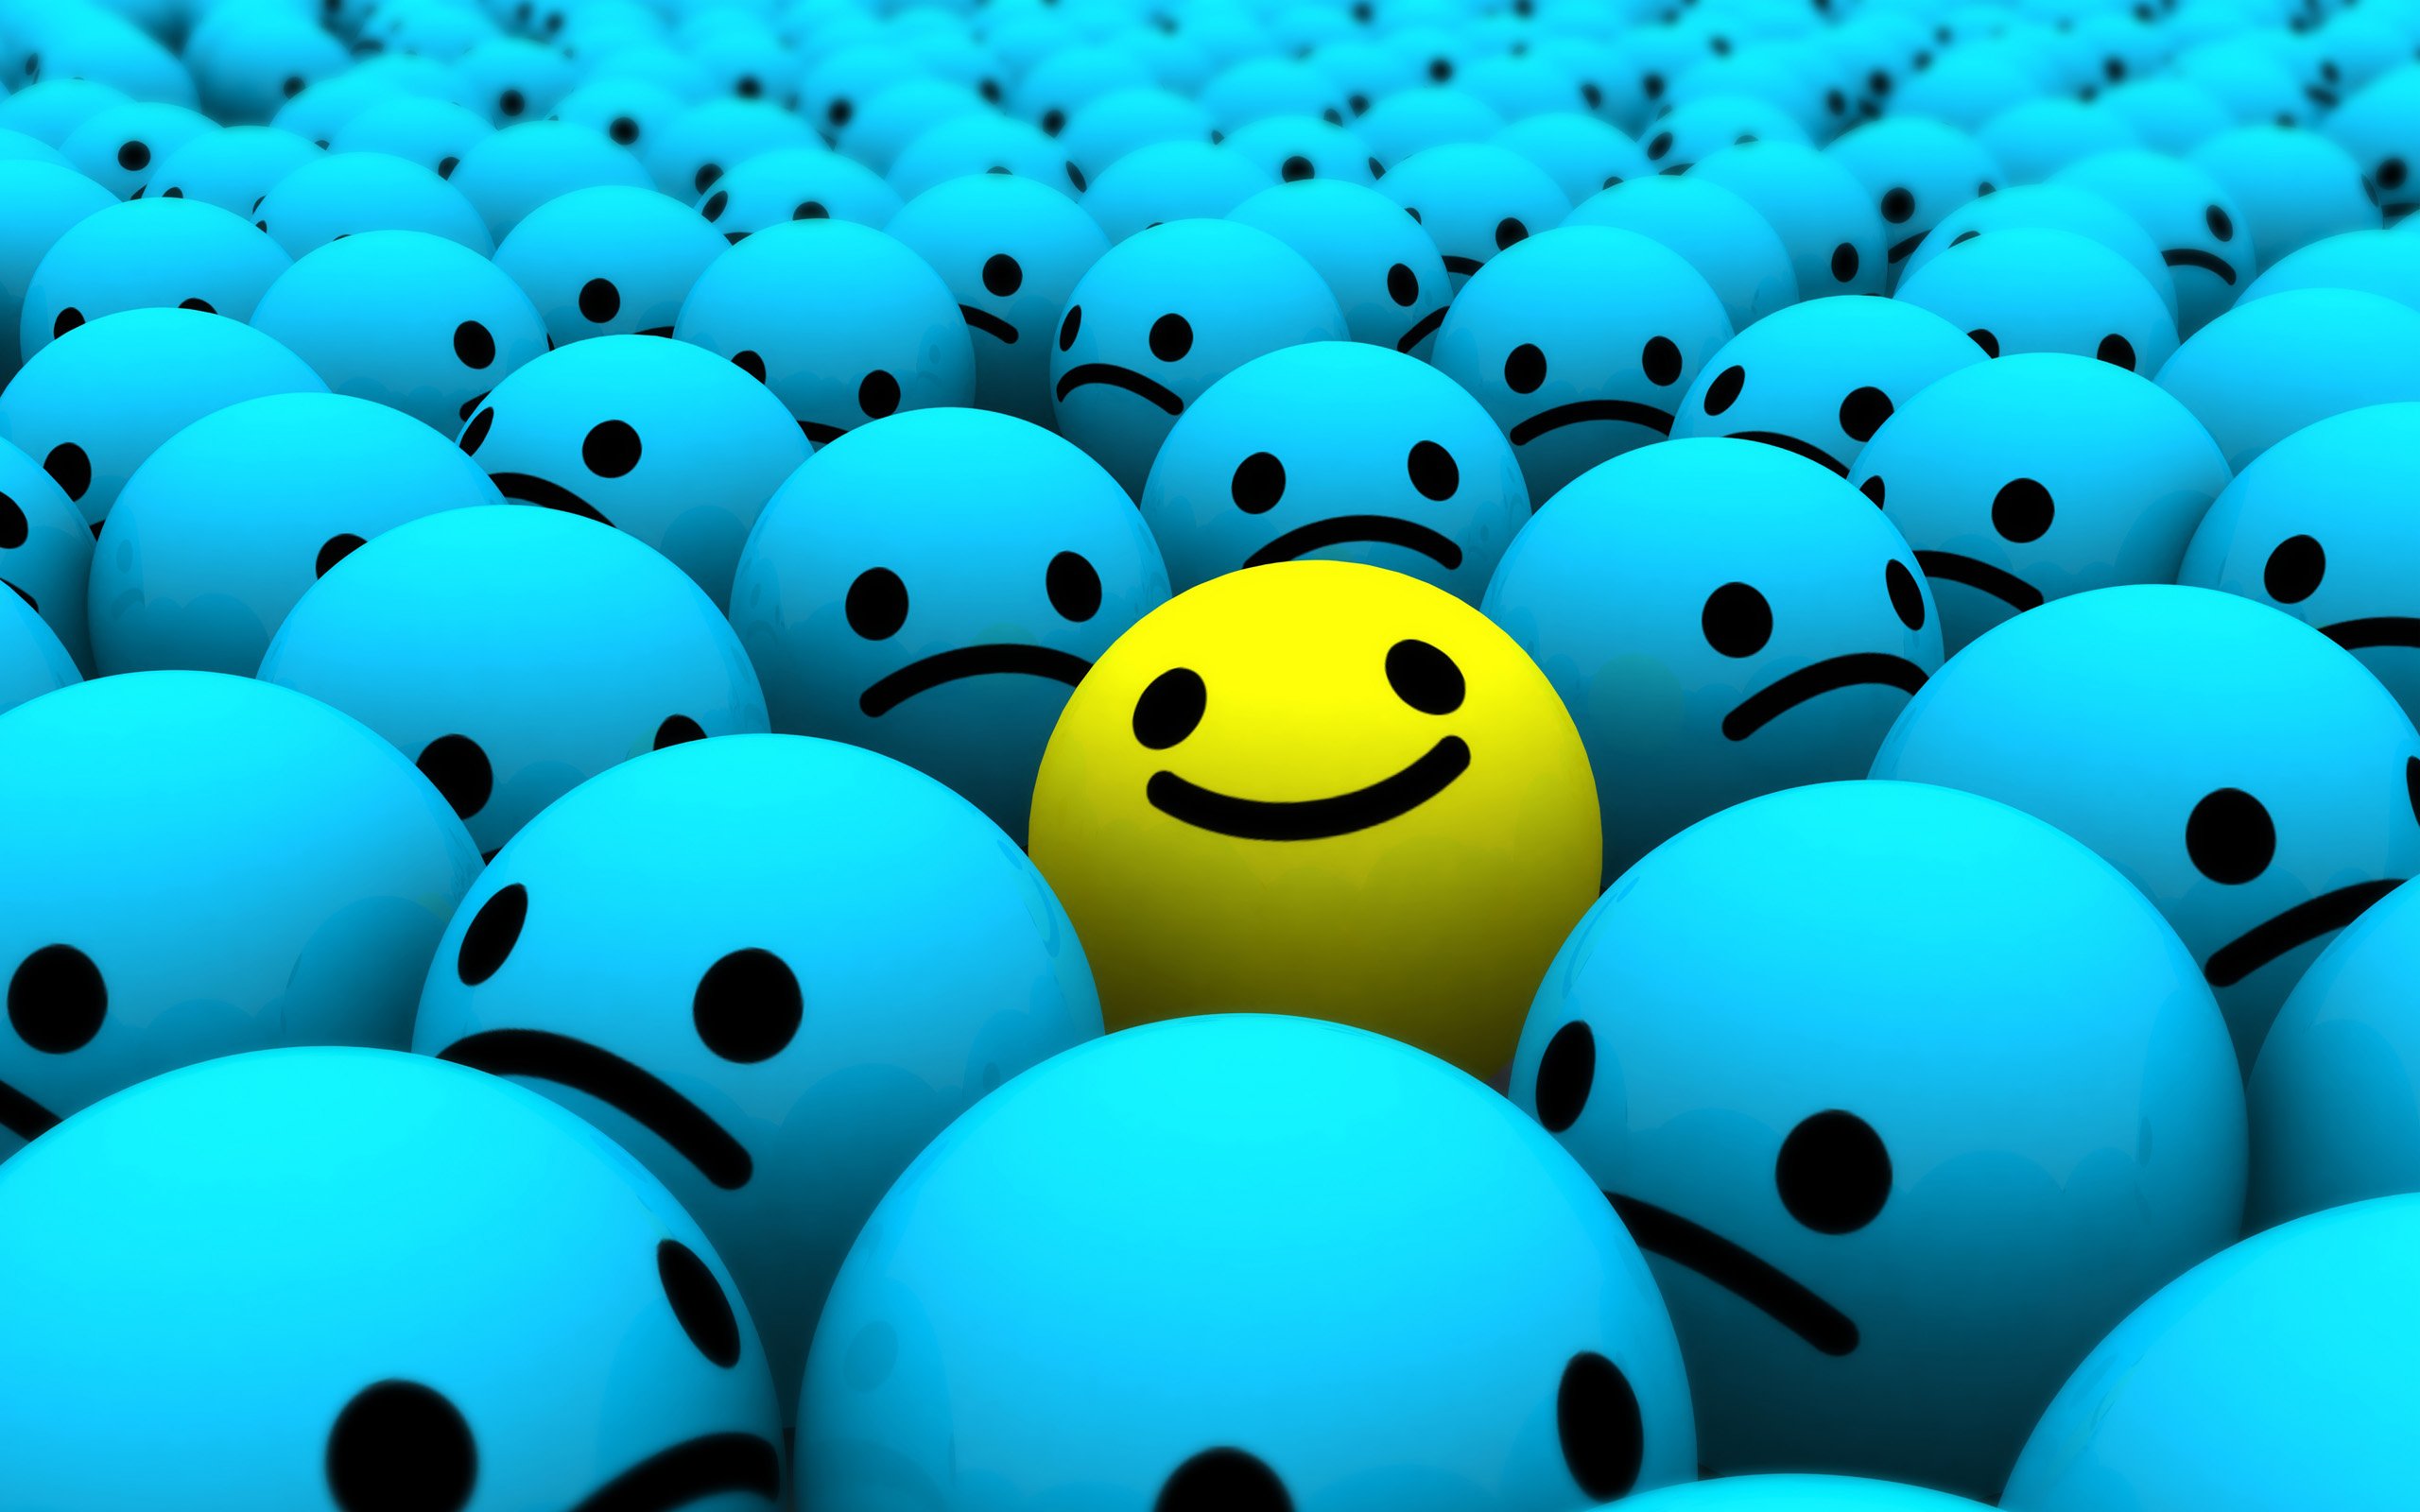 Smiley Faces Exclusive HD Wallpapers 1823 2560x1600